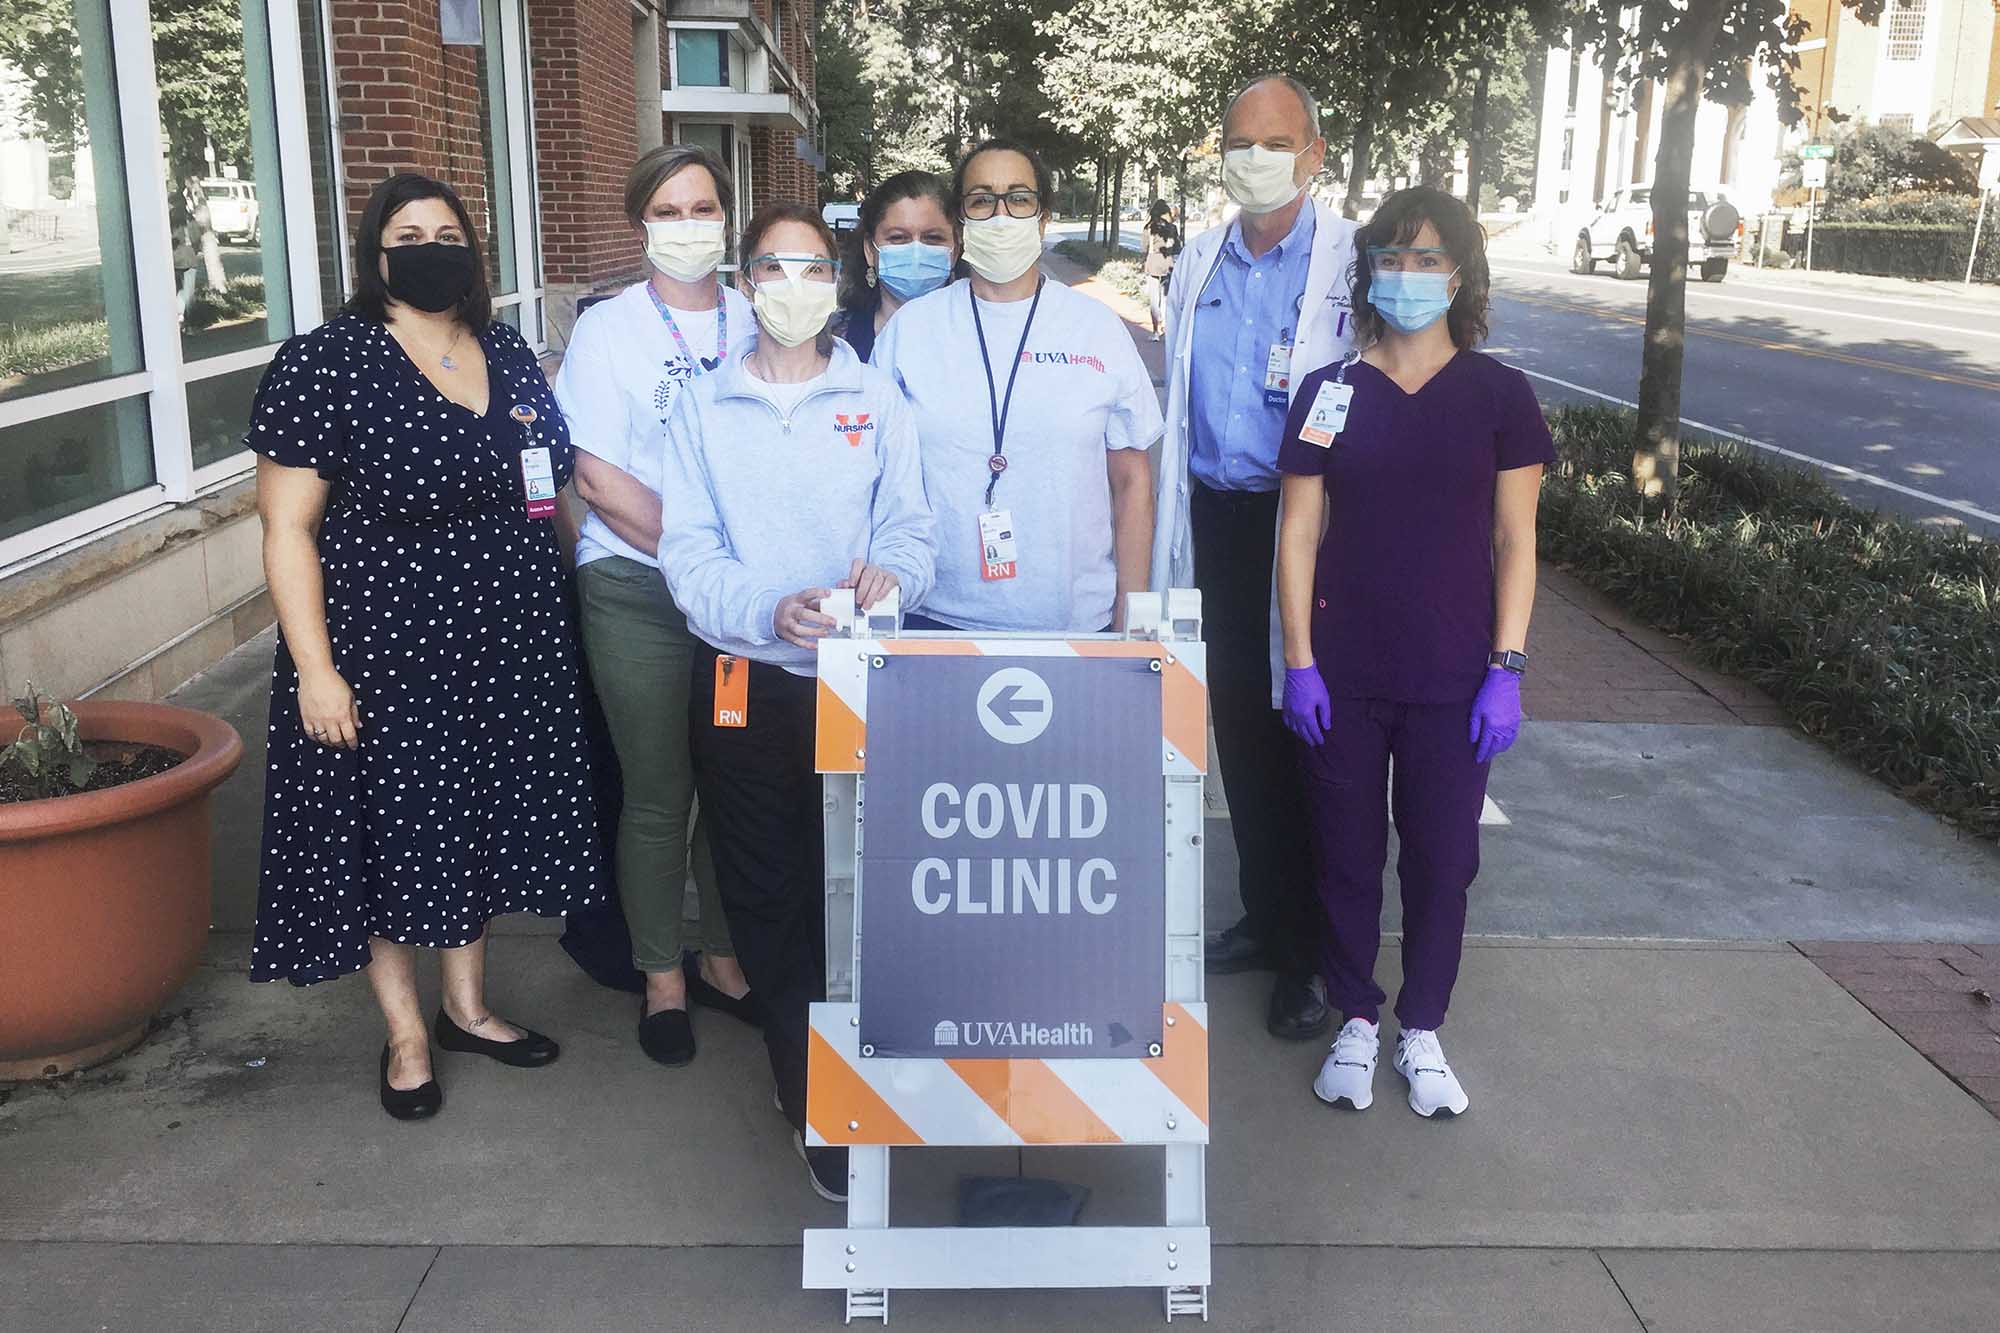 Bridgette Arlook, Christy Breeden, Rebecca Wade, Crystal Reed, Jennifer Pinnata, William Petri Jr. and Andrea Stanley pose together for a group photo at a covid clinic